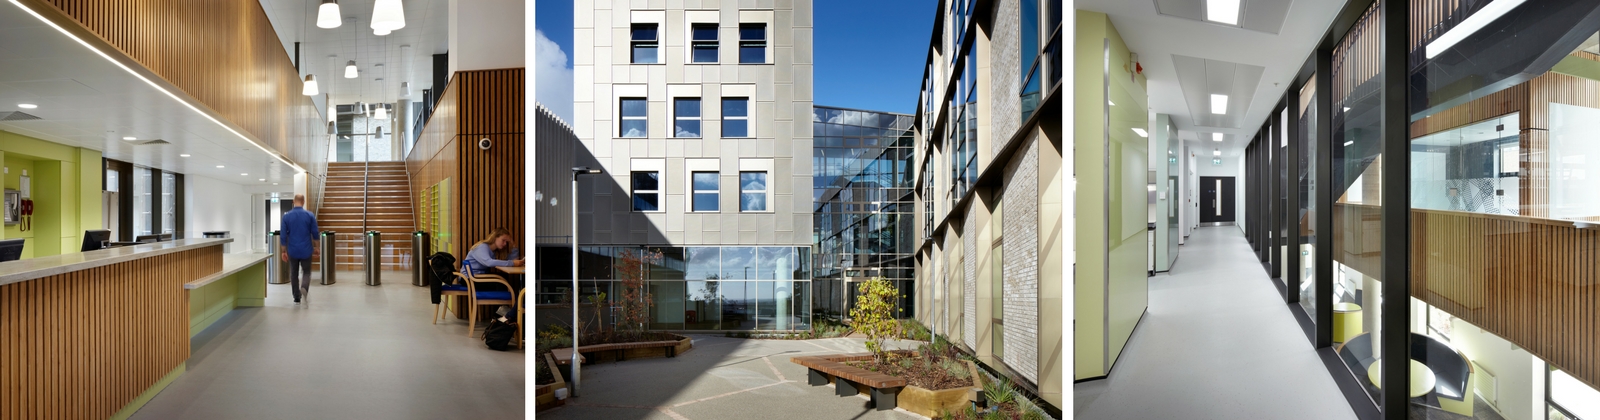 The Living Systems Institute, University of Exeter wins Building of the Year